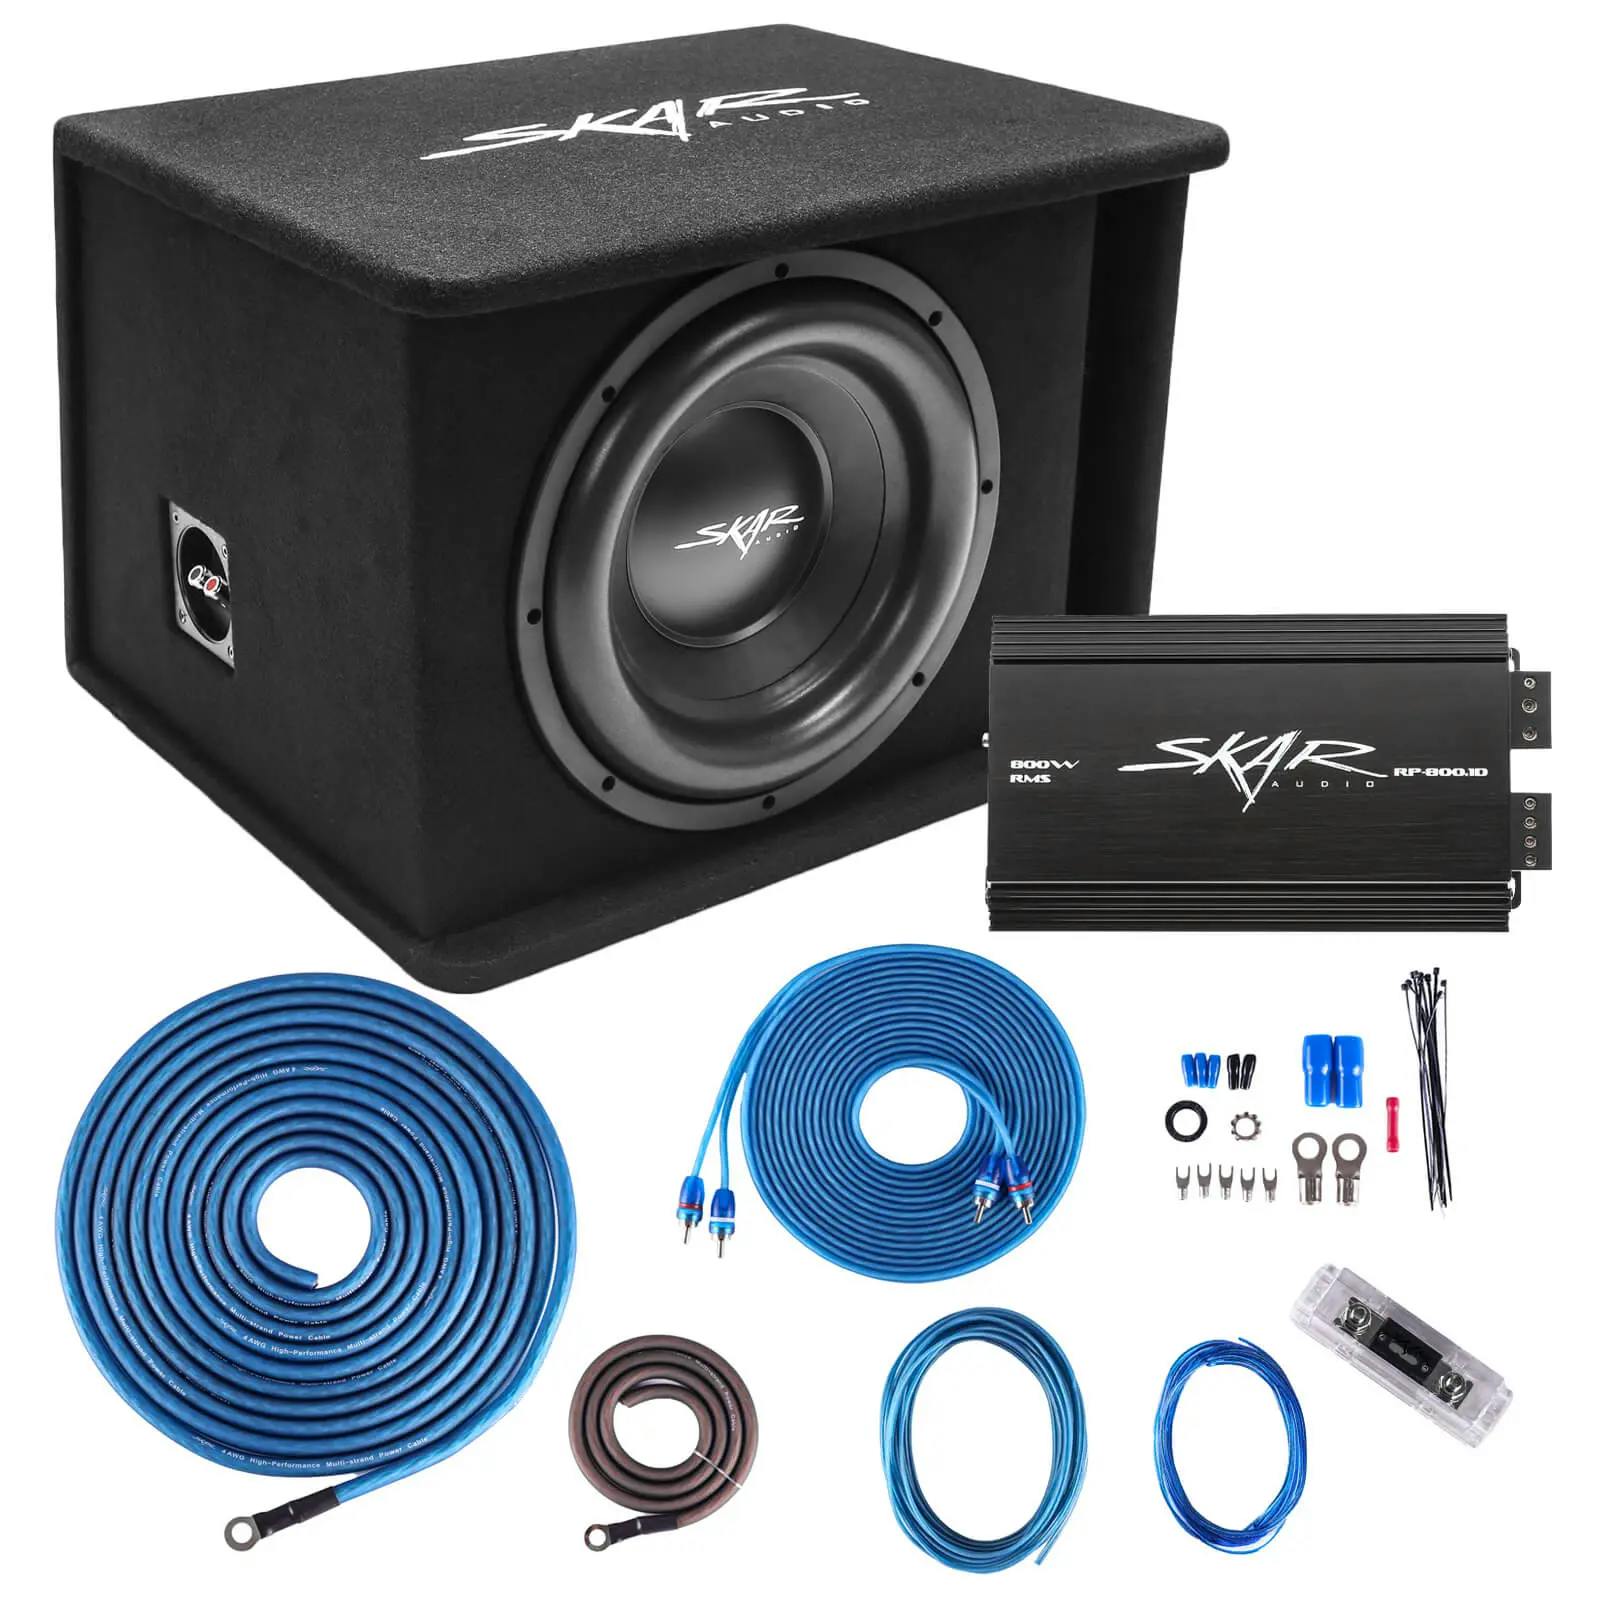 Featured Product Photo for Single 12" 1,200 Watt SDR Series Complete Subwoofer Package with Vented Enclosure and Amplifier